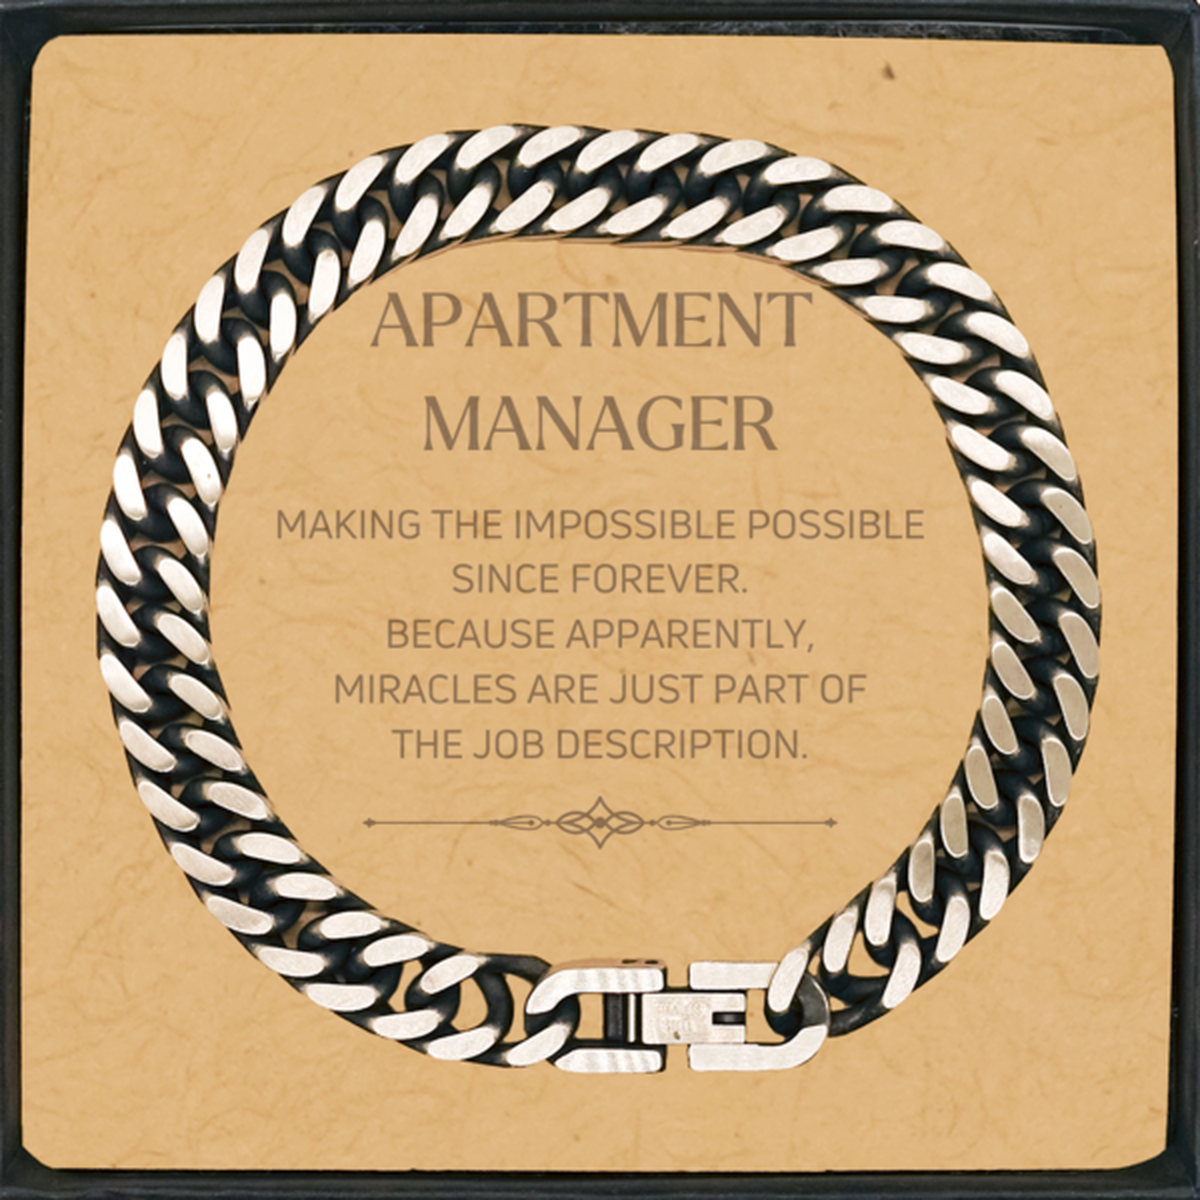 Funny Apartment Manager Gifts, Miracles are just part of the job description, Inspirational Birthday Cuban Link Chain Bracelet For Apartment Manager, Men, Women, Coworkers, Friends, Boss